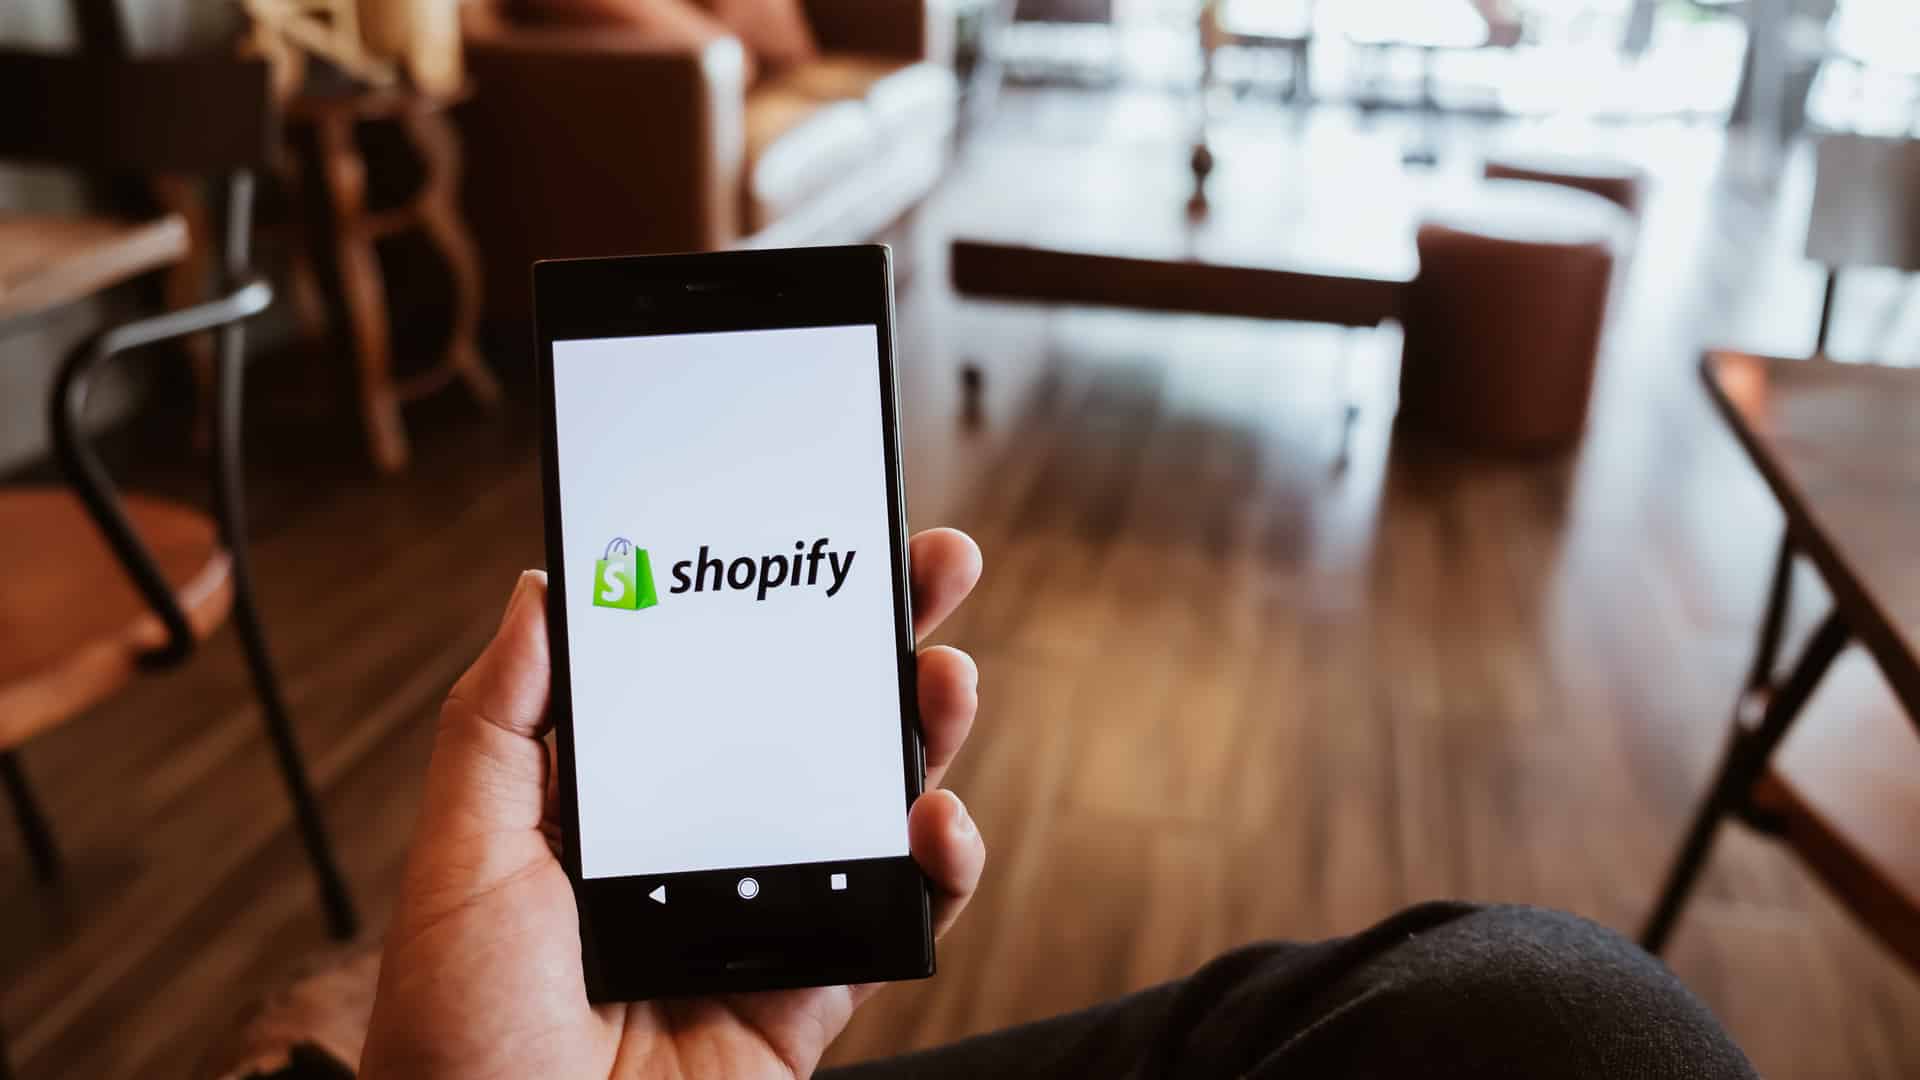 Shopify rolls out Linkpop for social commerce and other updates for marketers